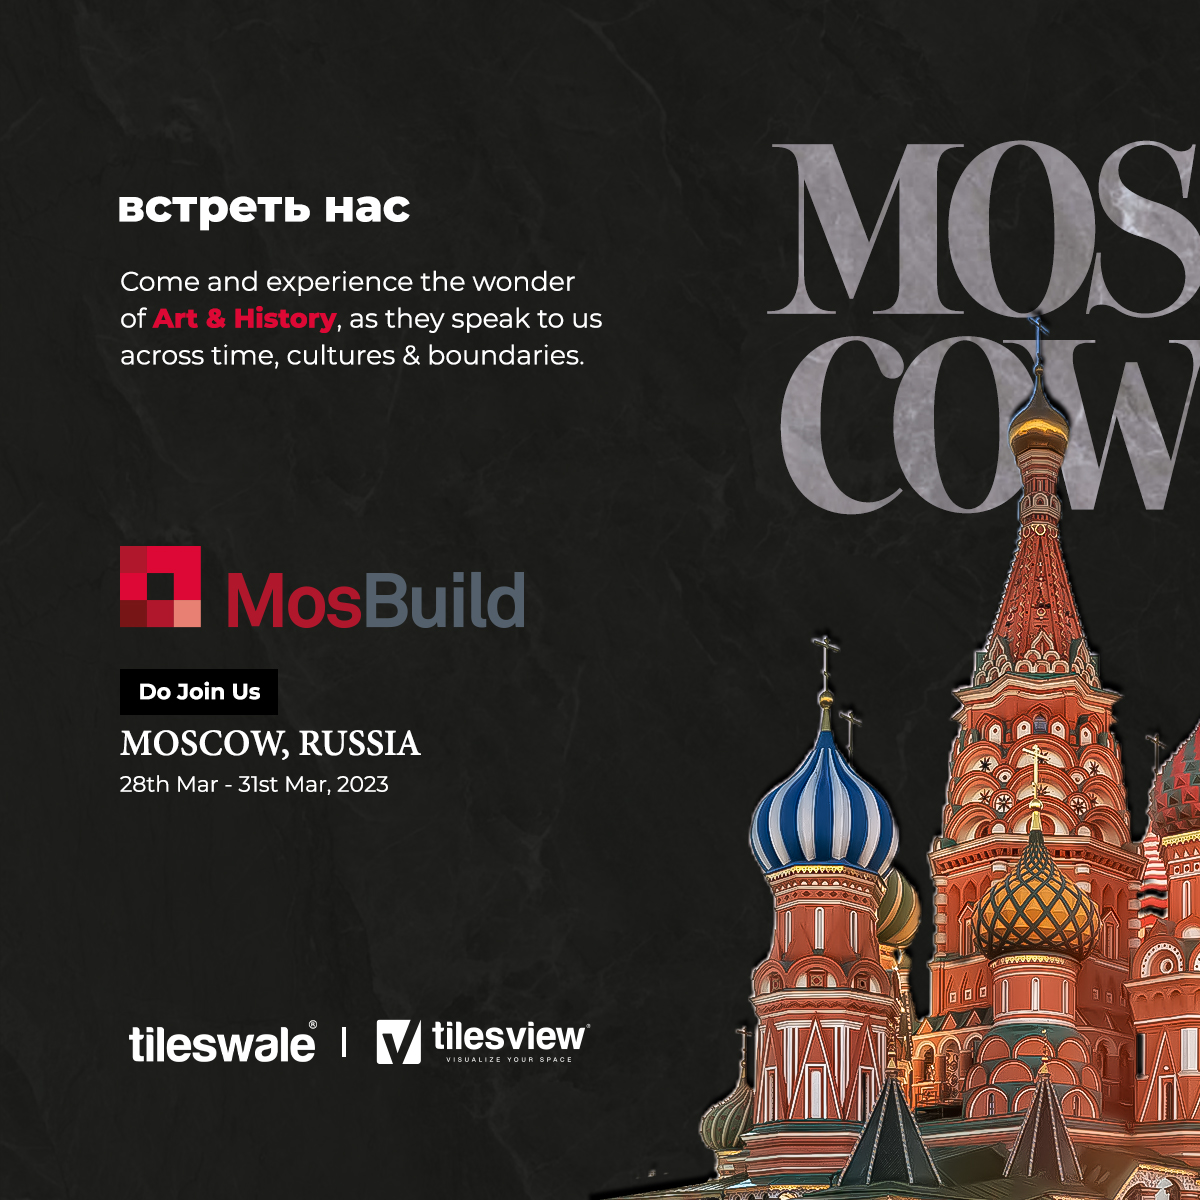 Welcome to Mosbuild 2023!!🤩

Tileswale and Tilesview are bringing together the best minds in the industry to showcase the latest technology. You don't want to miss this!'

#exhibition #moscow #russia #mosbuild #MosBuild2023 #visitus #events #tilesview #tileswale